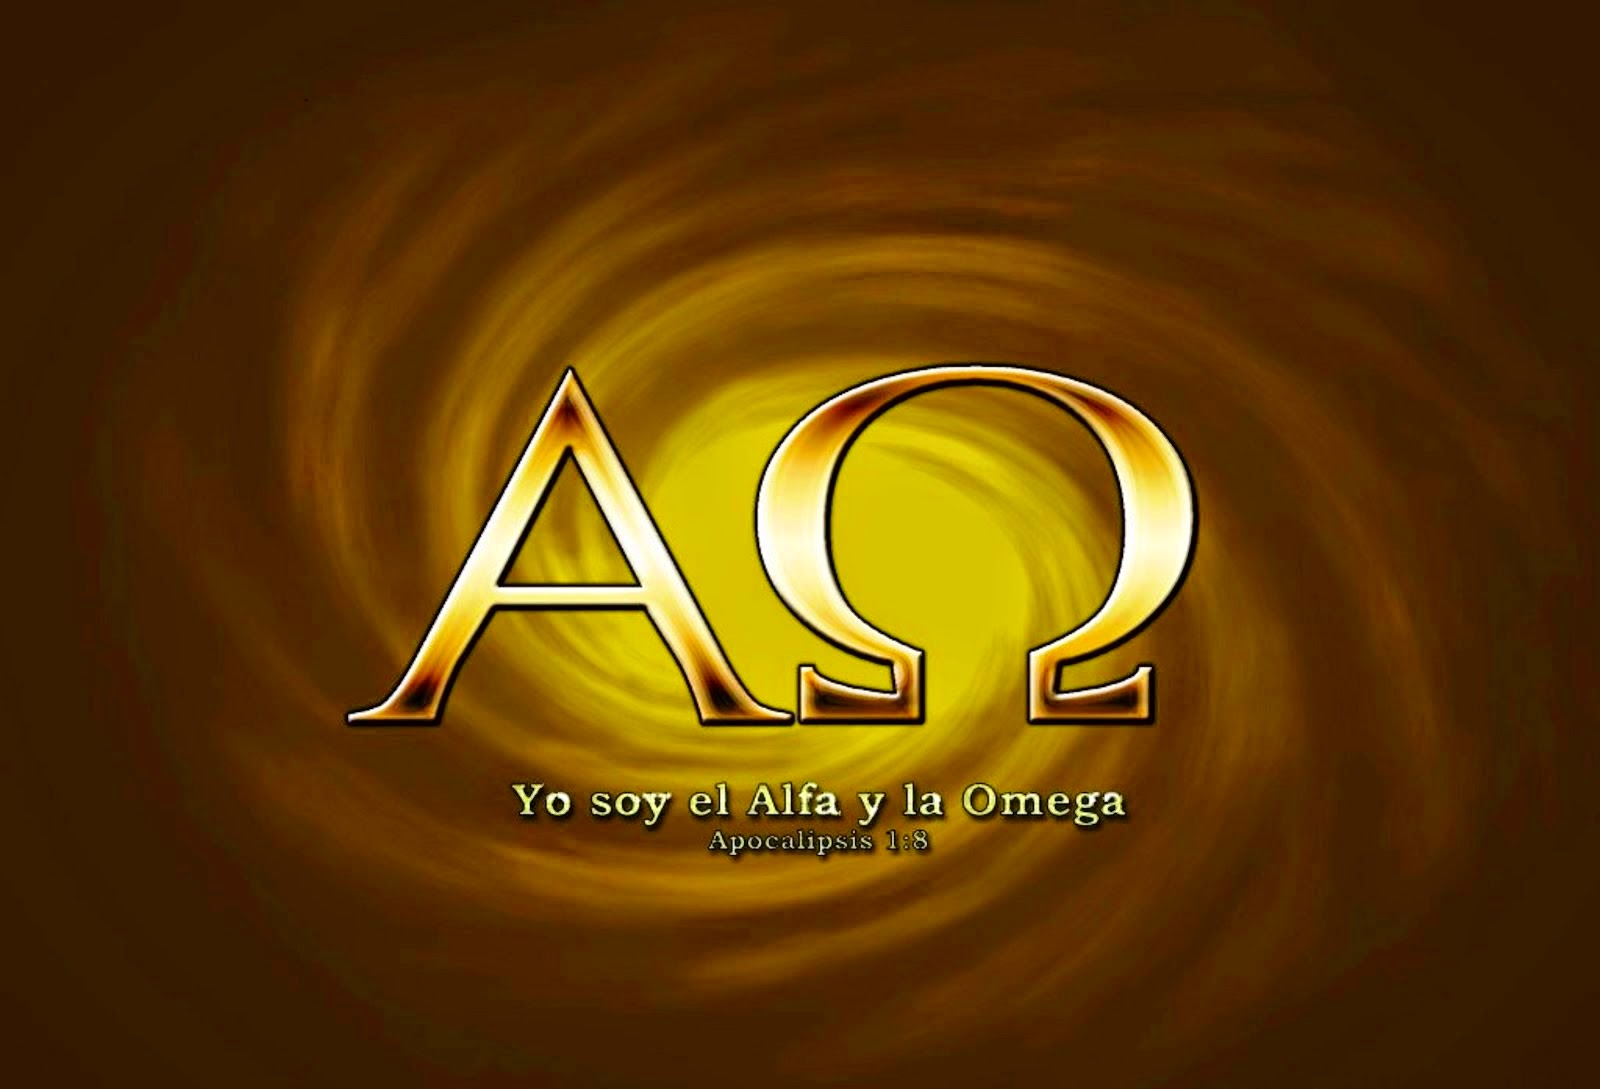 I'AM THE ALPHA AND THE OMEGA - THE BEGINING AND THE END OF ALL THINGS